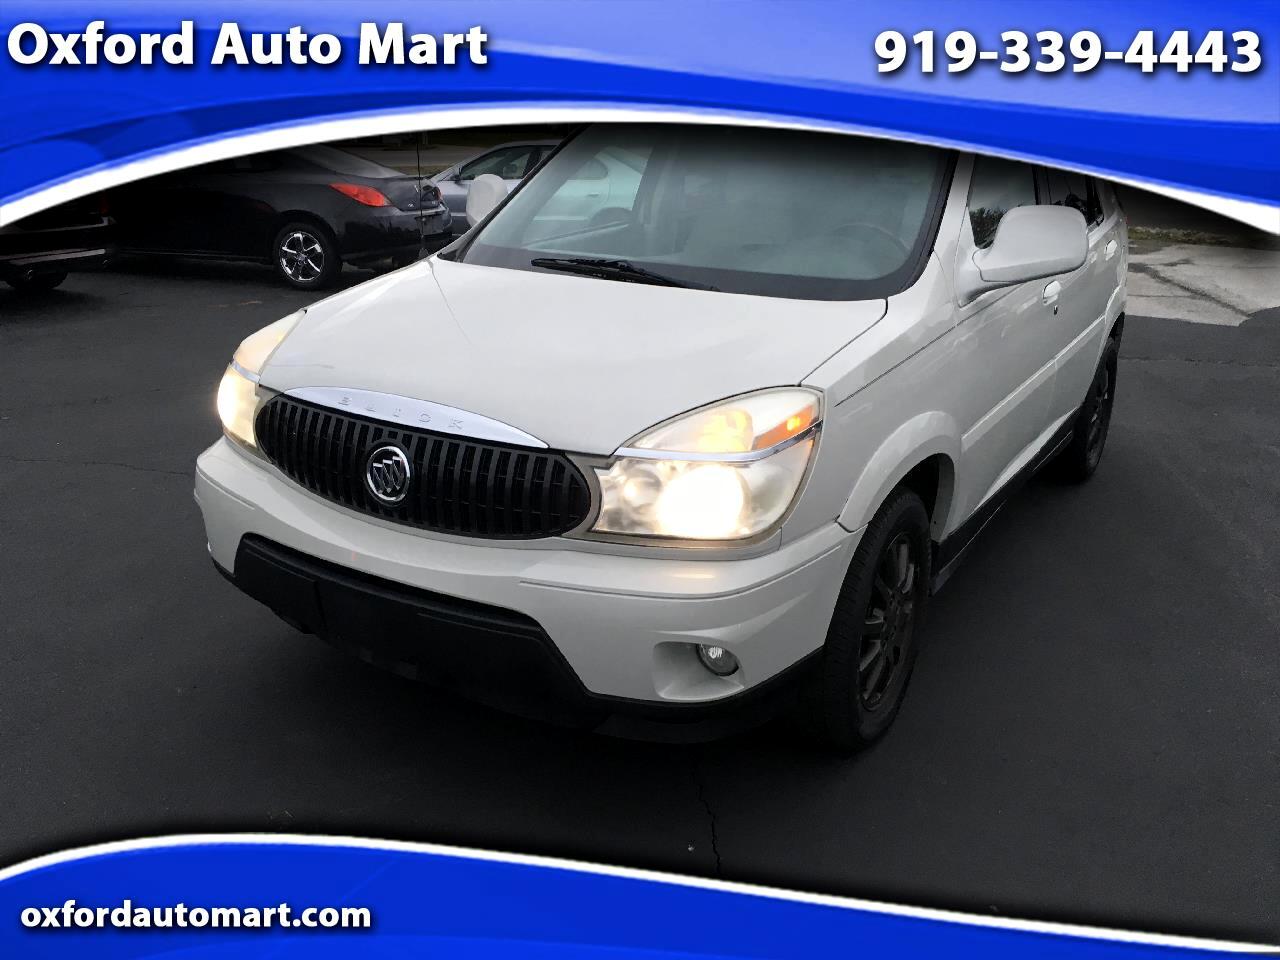 Used 2006 Buick Rendezvous Cx For Sale In Oxford Nc 27565